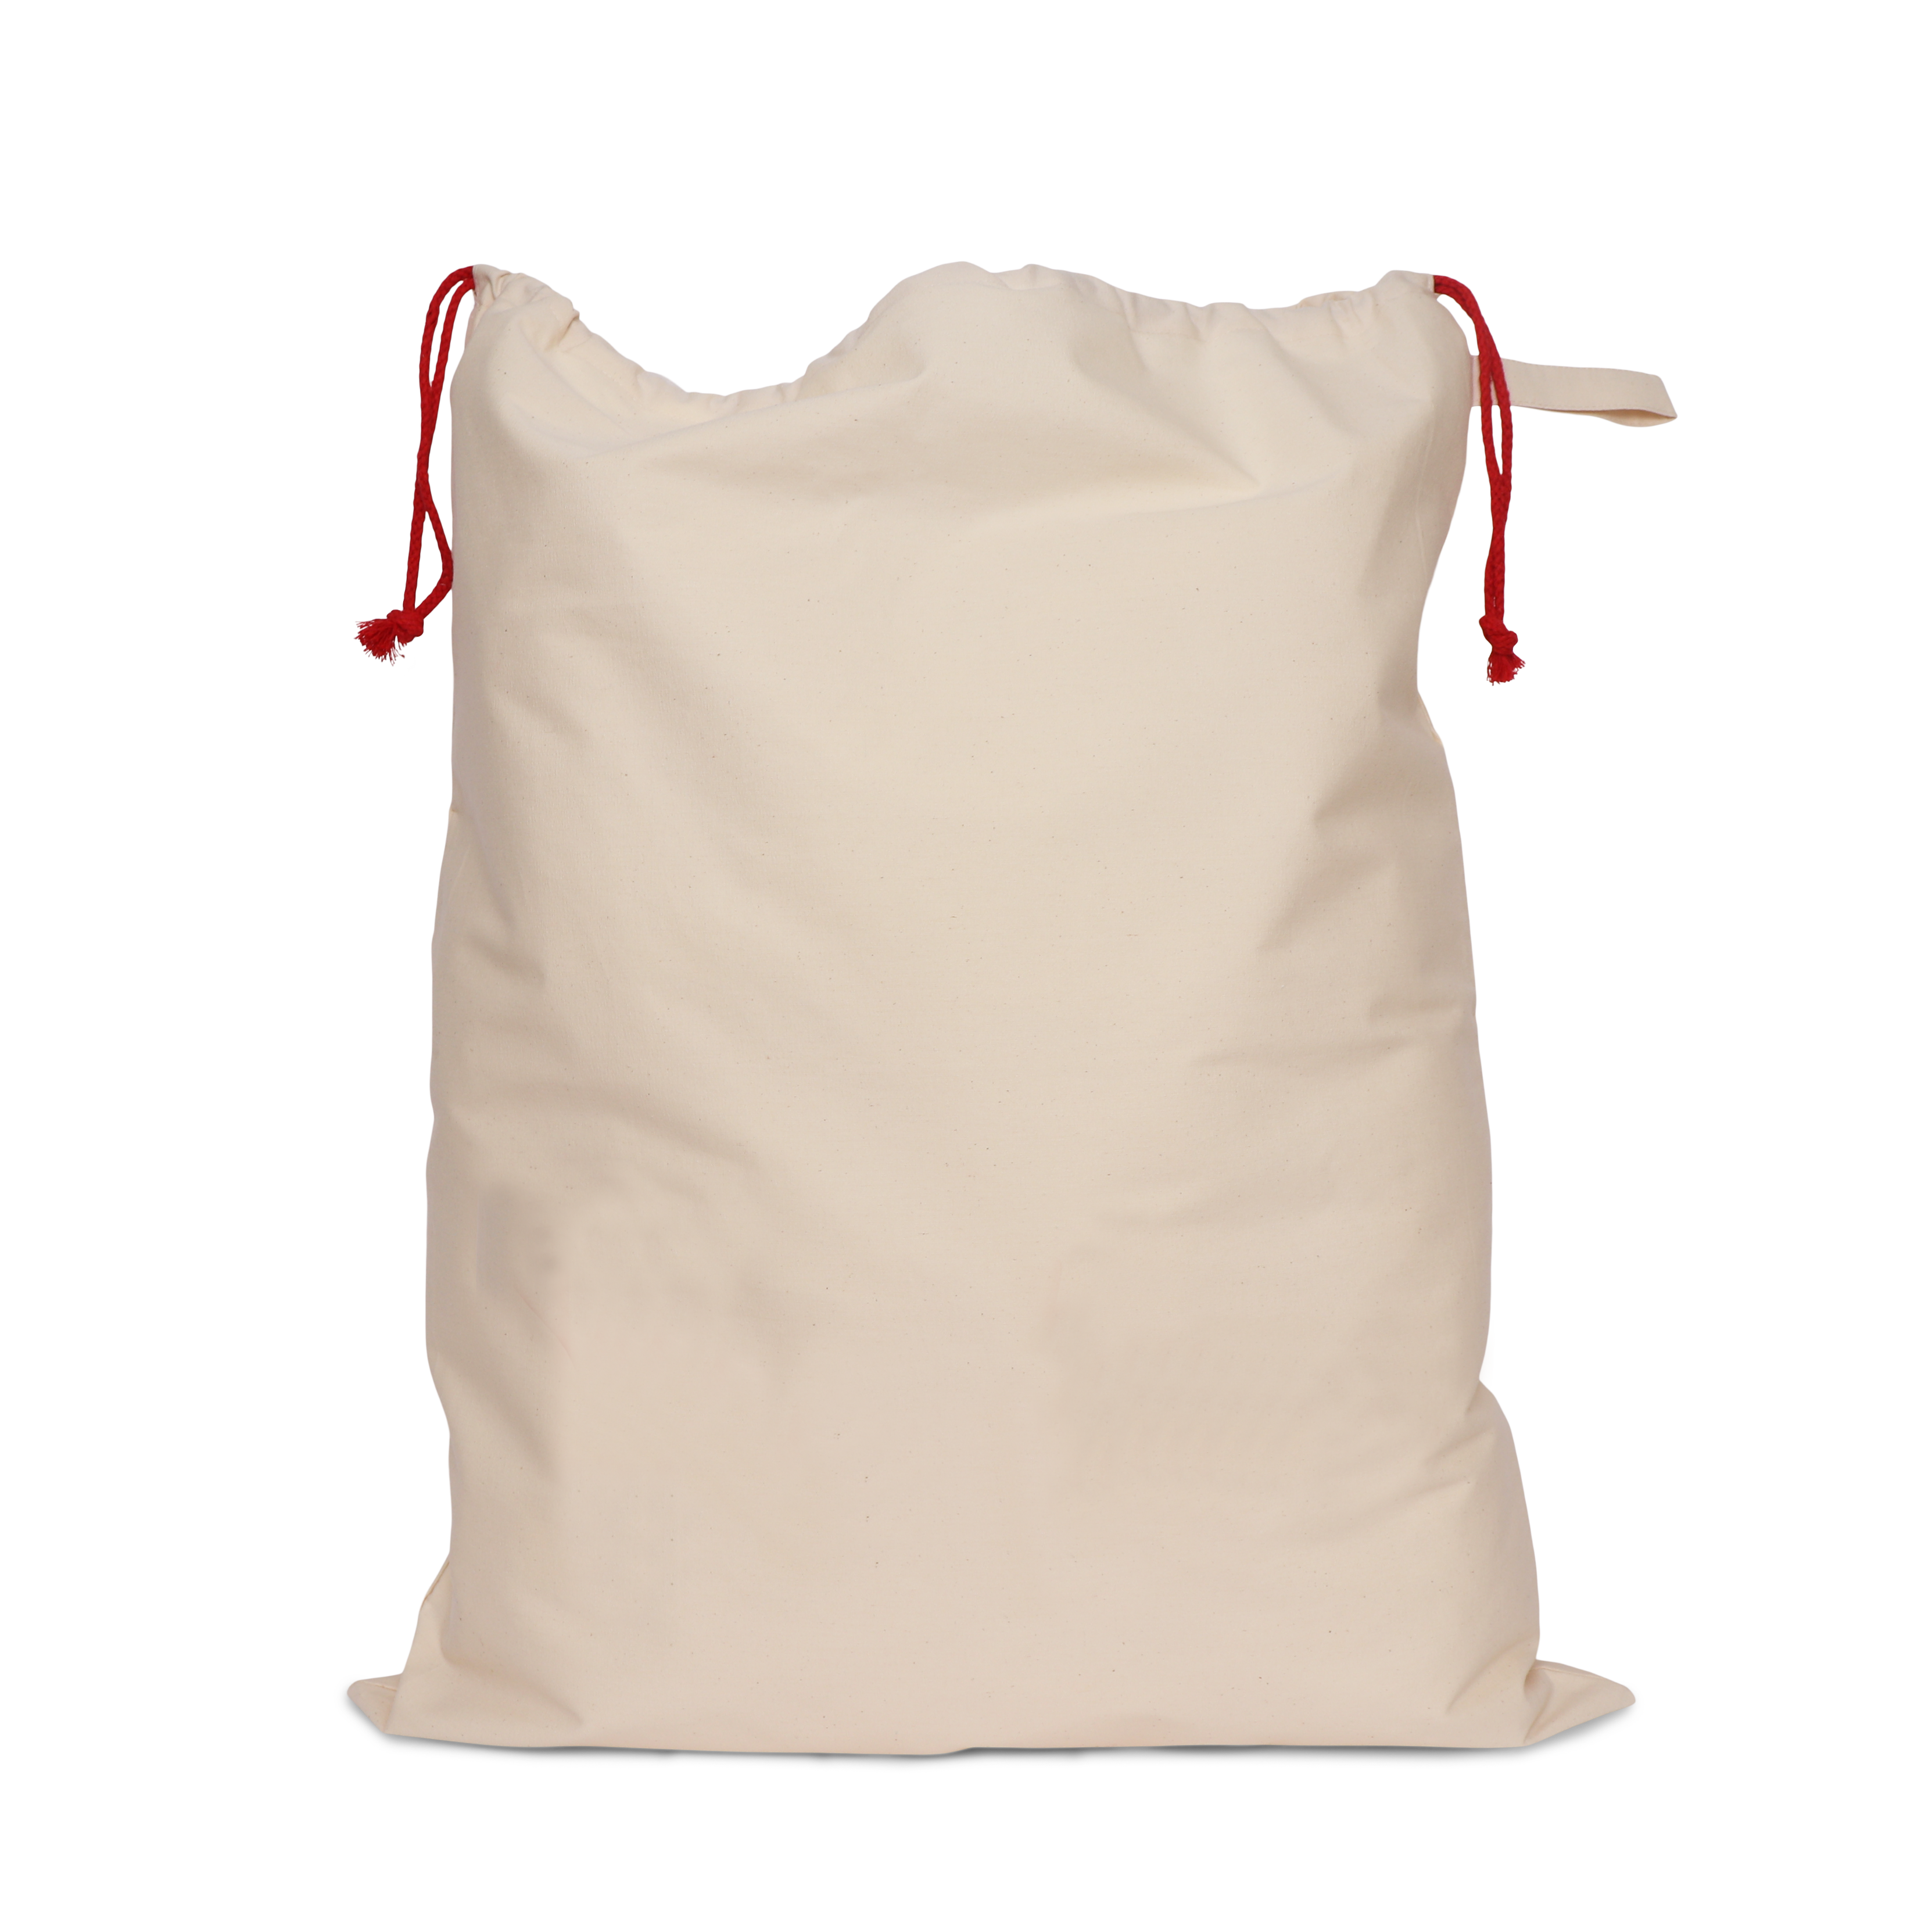 Name Sack Red, Personalisable